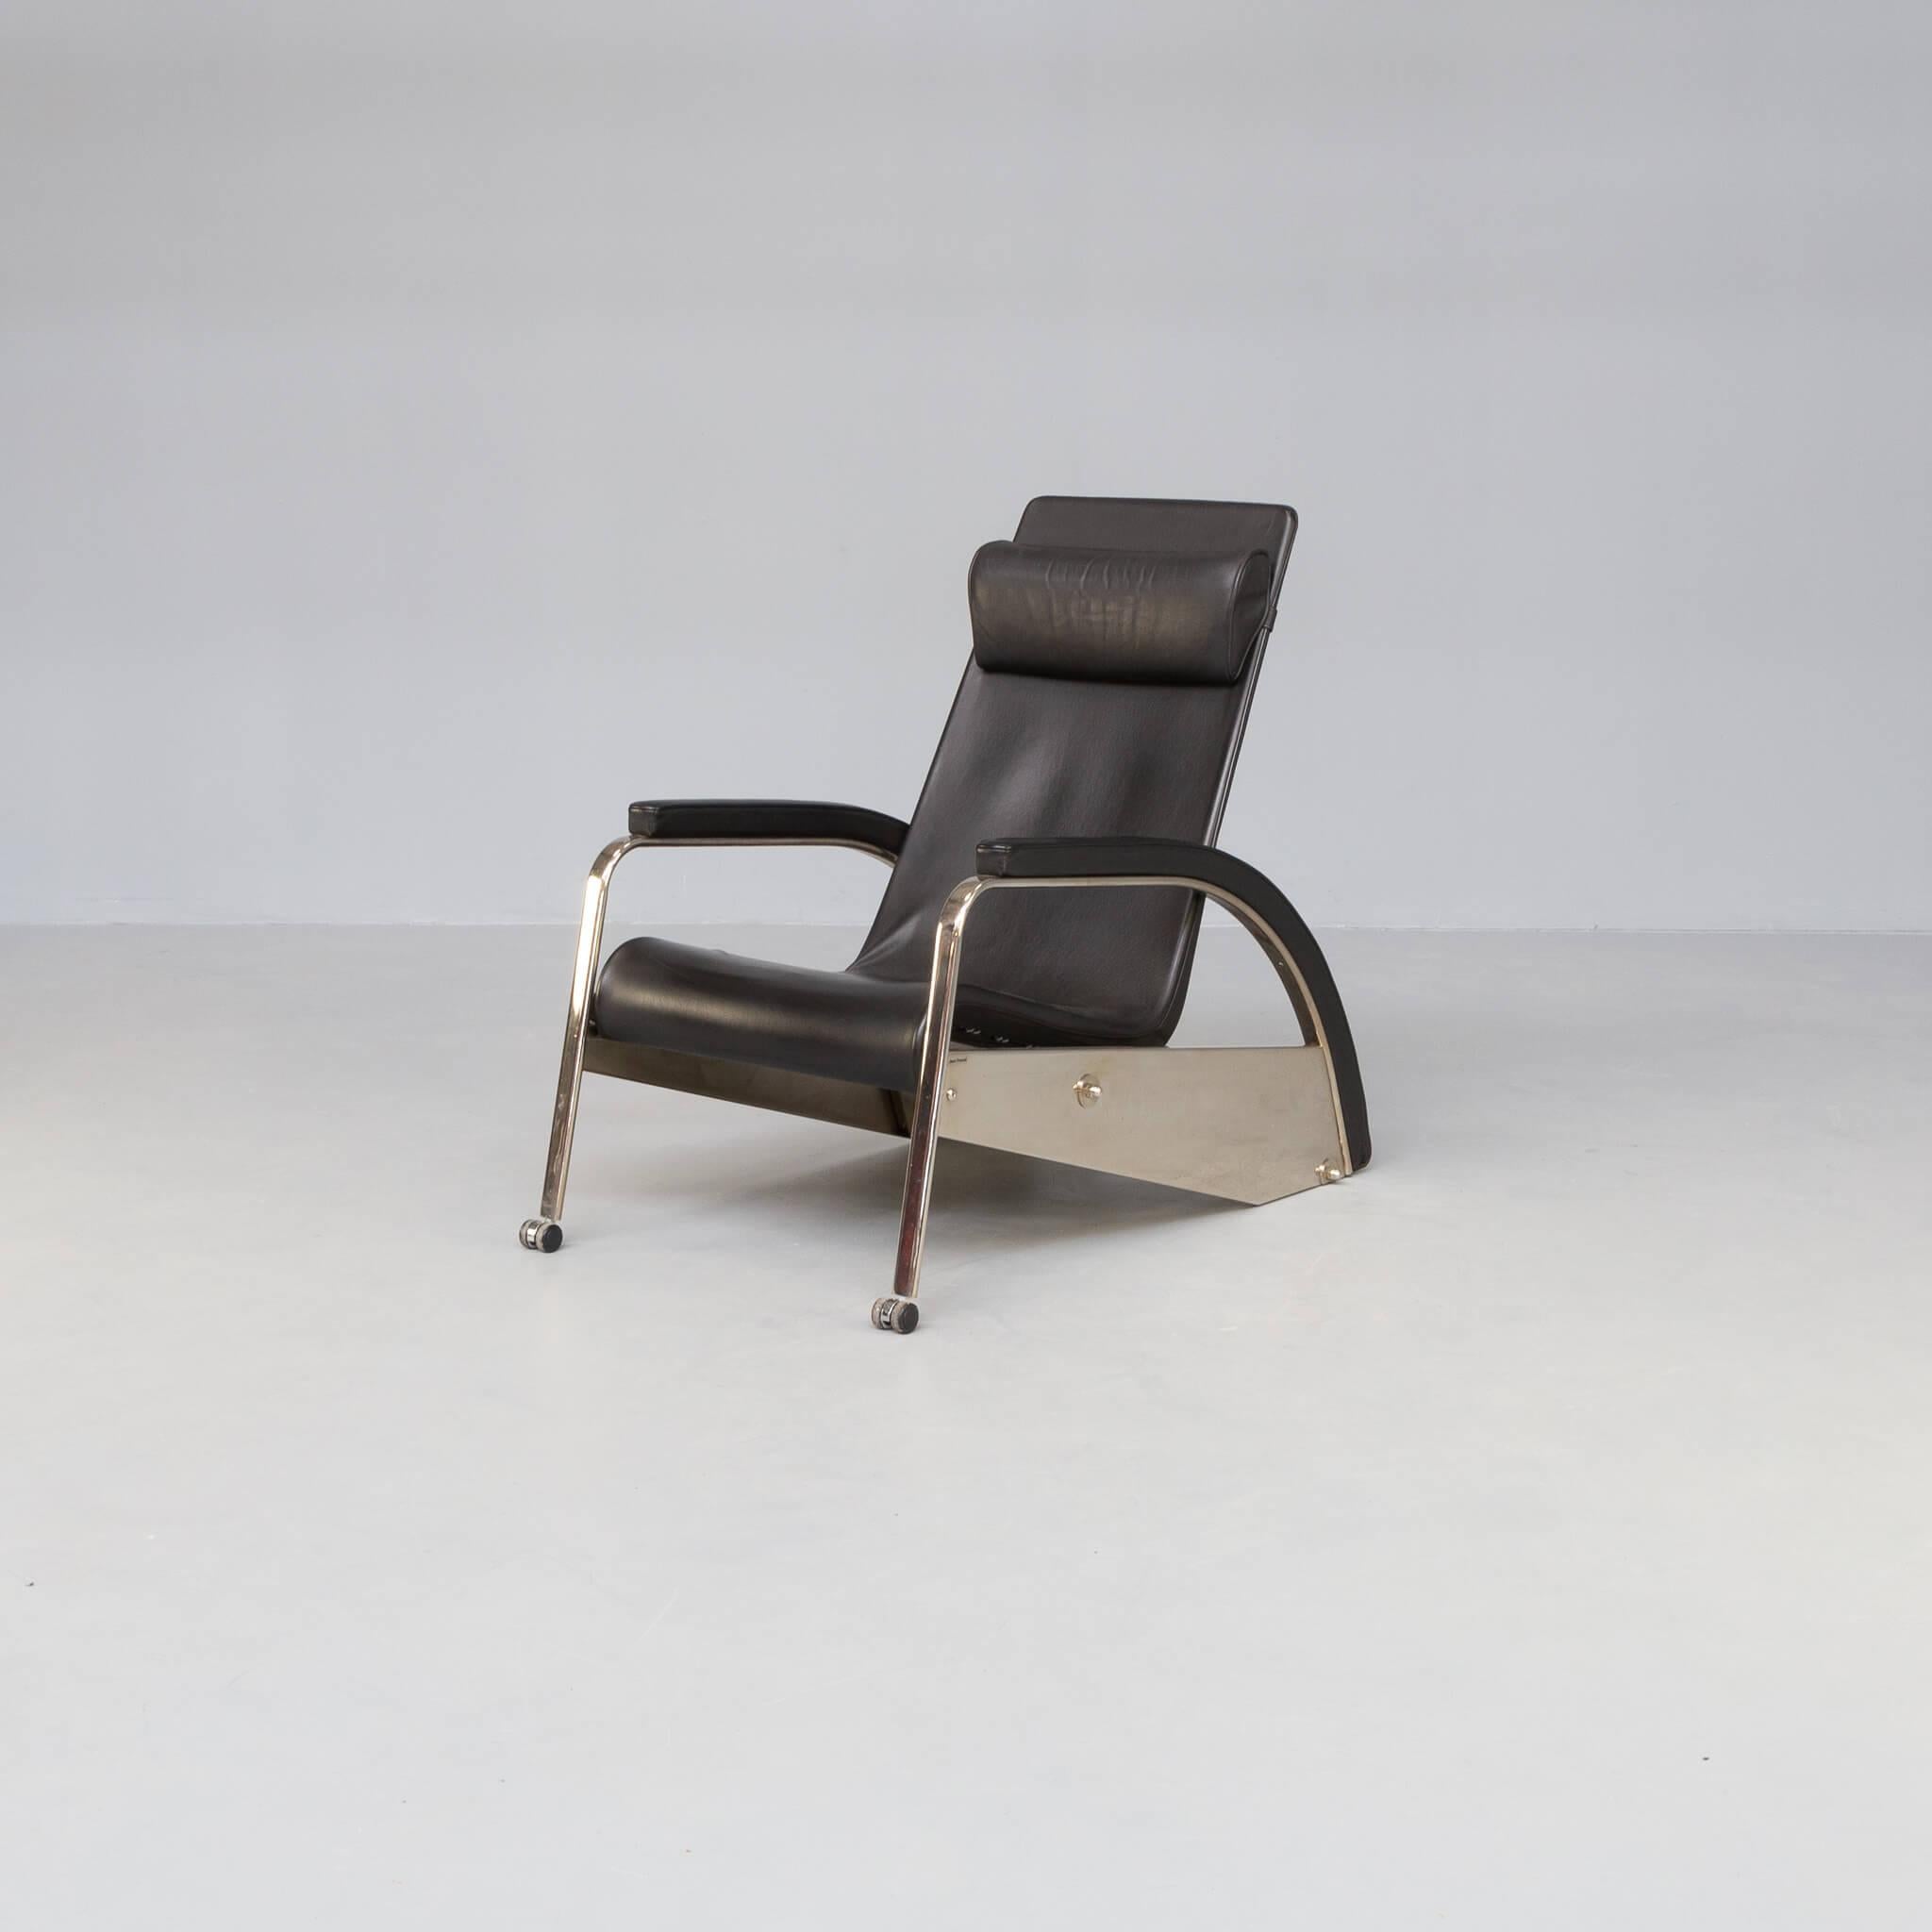 Jean Prouvé designed the model ‘grand repos D80-1’ lounge chair between 1928 and 1930. Tecta reproduced the chair in the 1980’s and manufactured the chair in Germany.
A slightly visible, spring mechanism enables the seat position to be adjusted